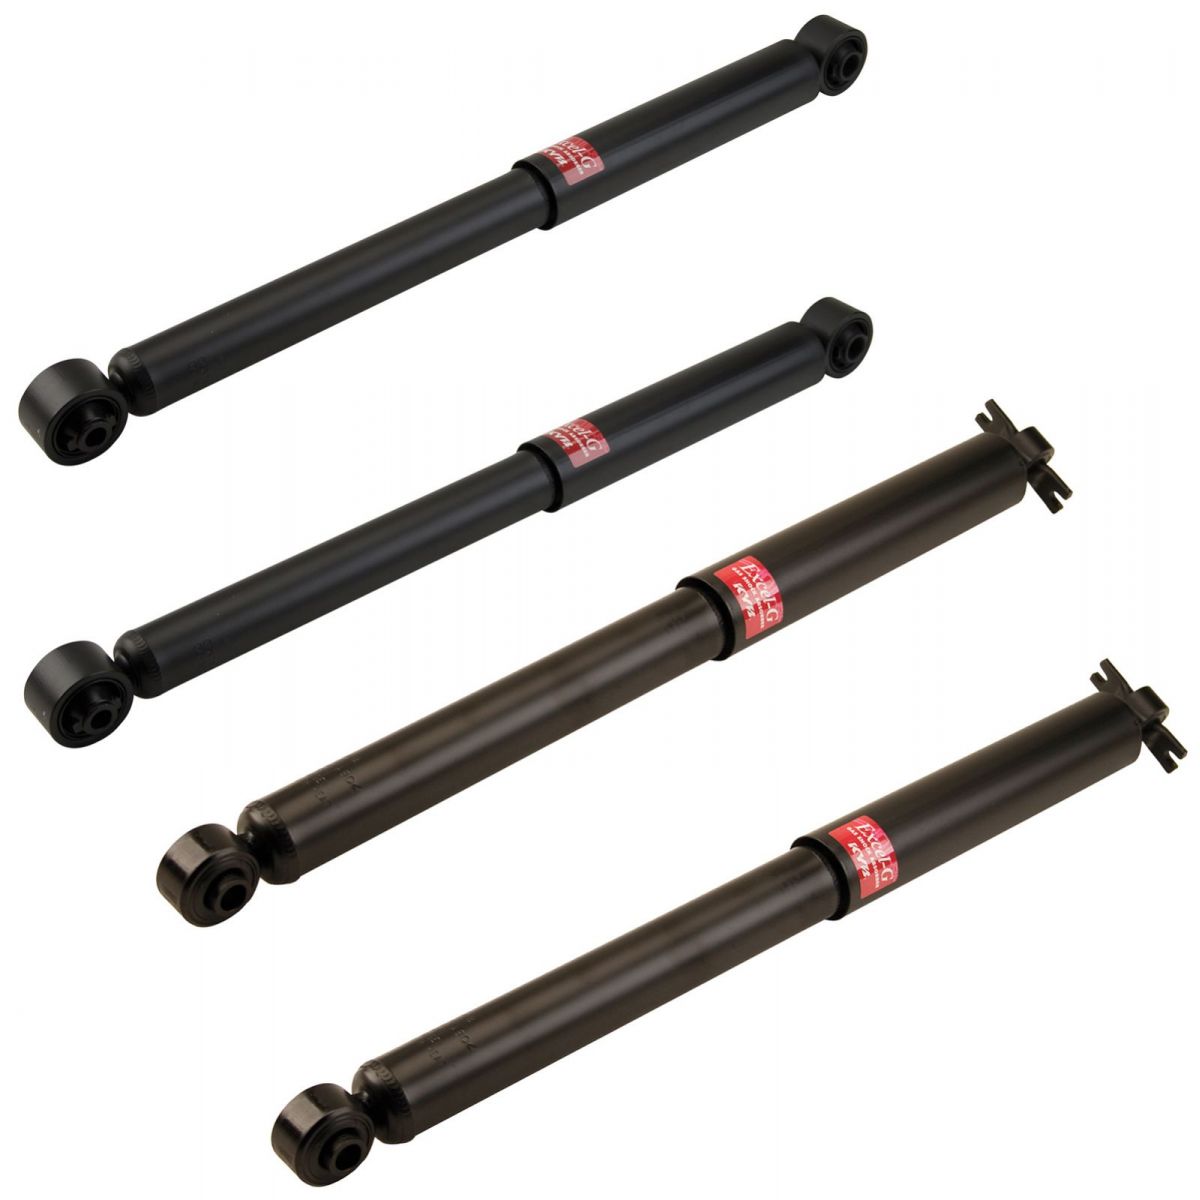 Rear and Front Shock Absorbers KYB Excel-G Kit for Toyota Corolla 2009-2010